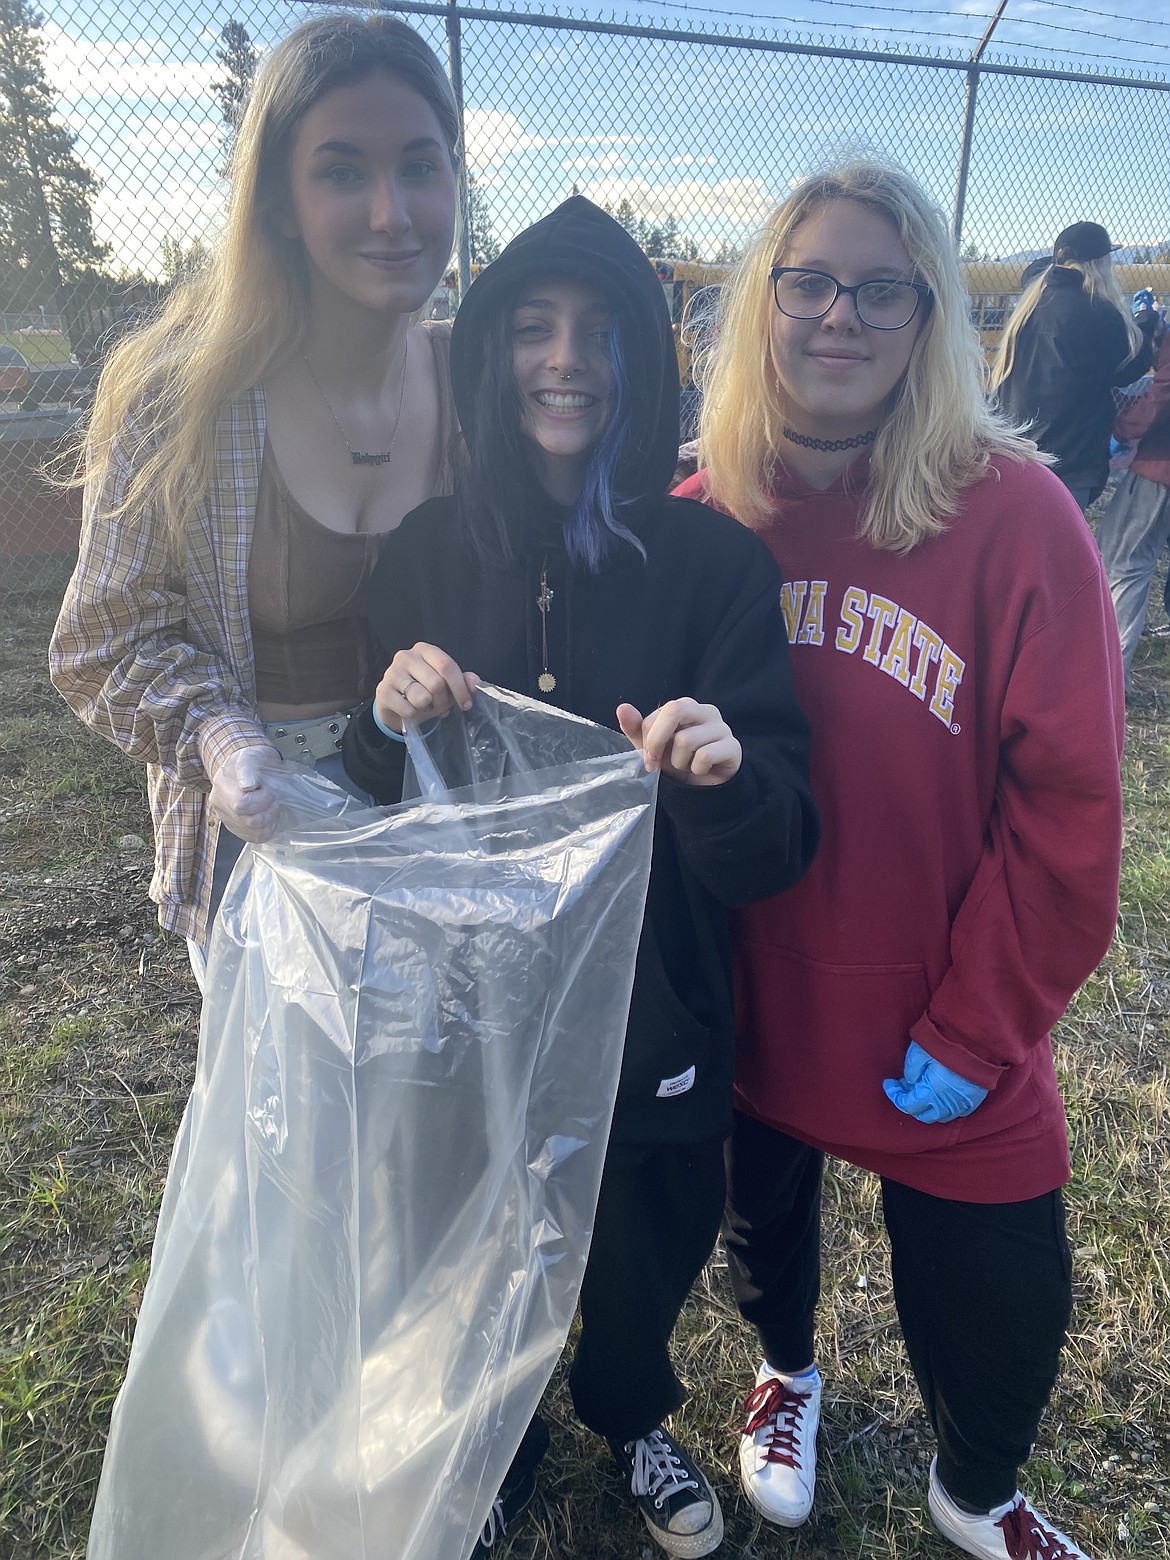 From left: Mountain View High School students Hannah Nunneley, Mackenzie Holder and Caitlyn Eliason collected rubbish along Main Street Wednesday.